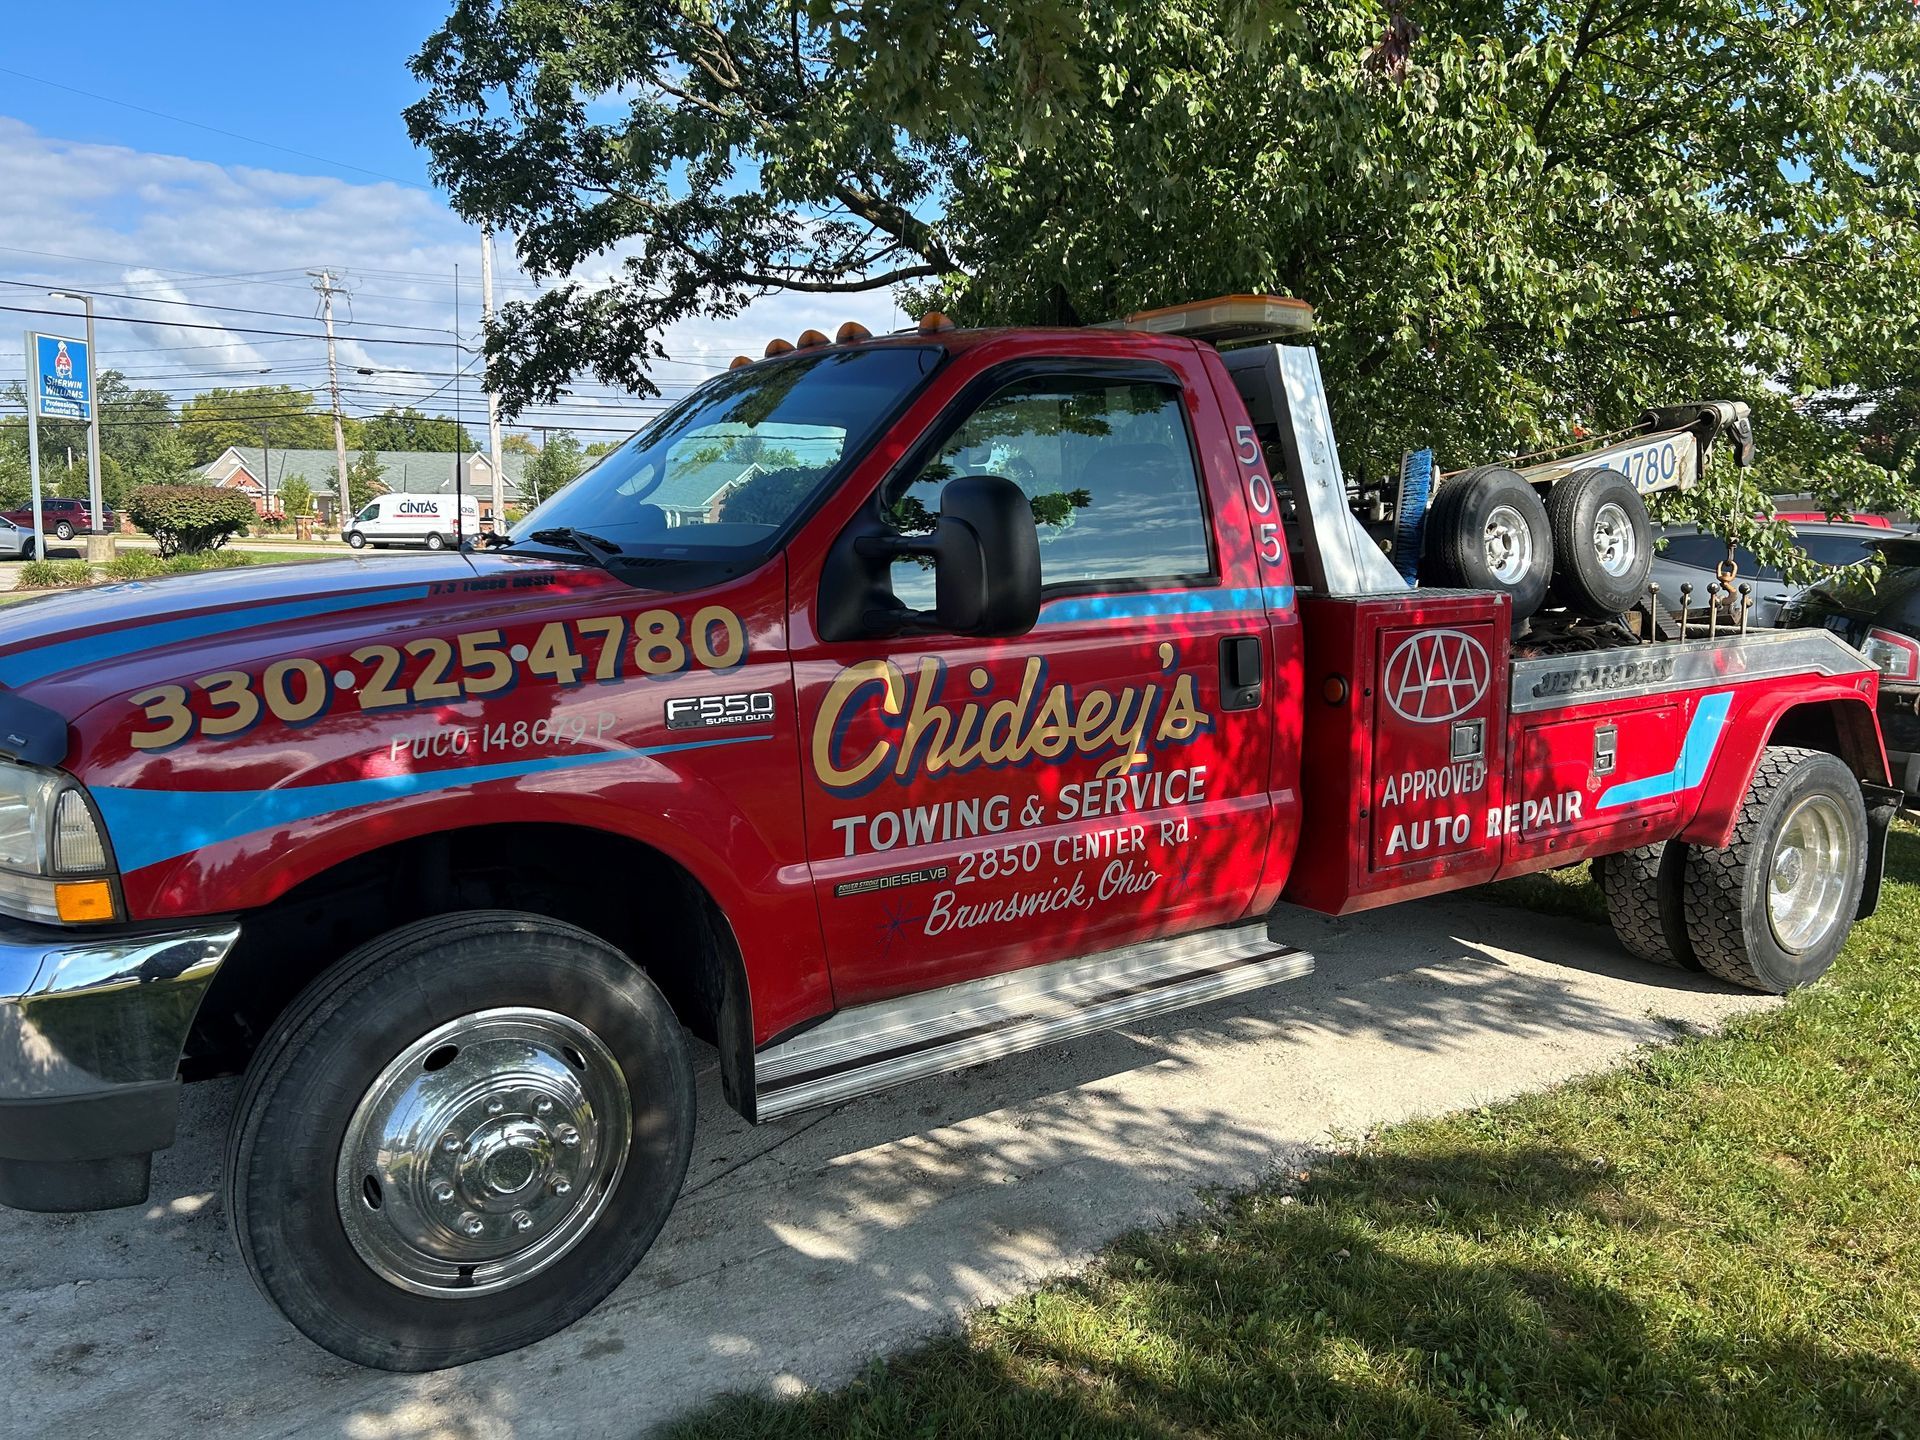 Right Side Of Tow Truck - Cleveland, OH - Chidsey's Towing & Service